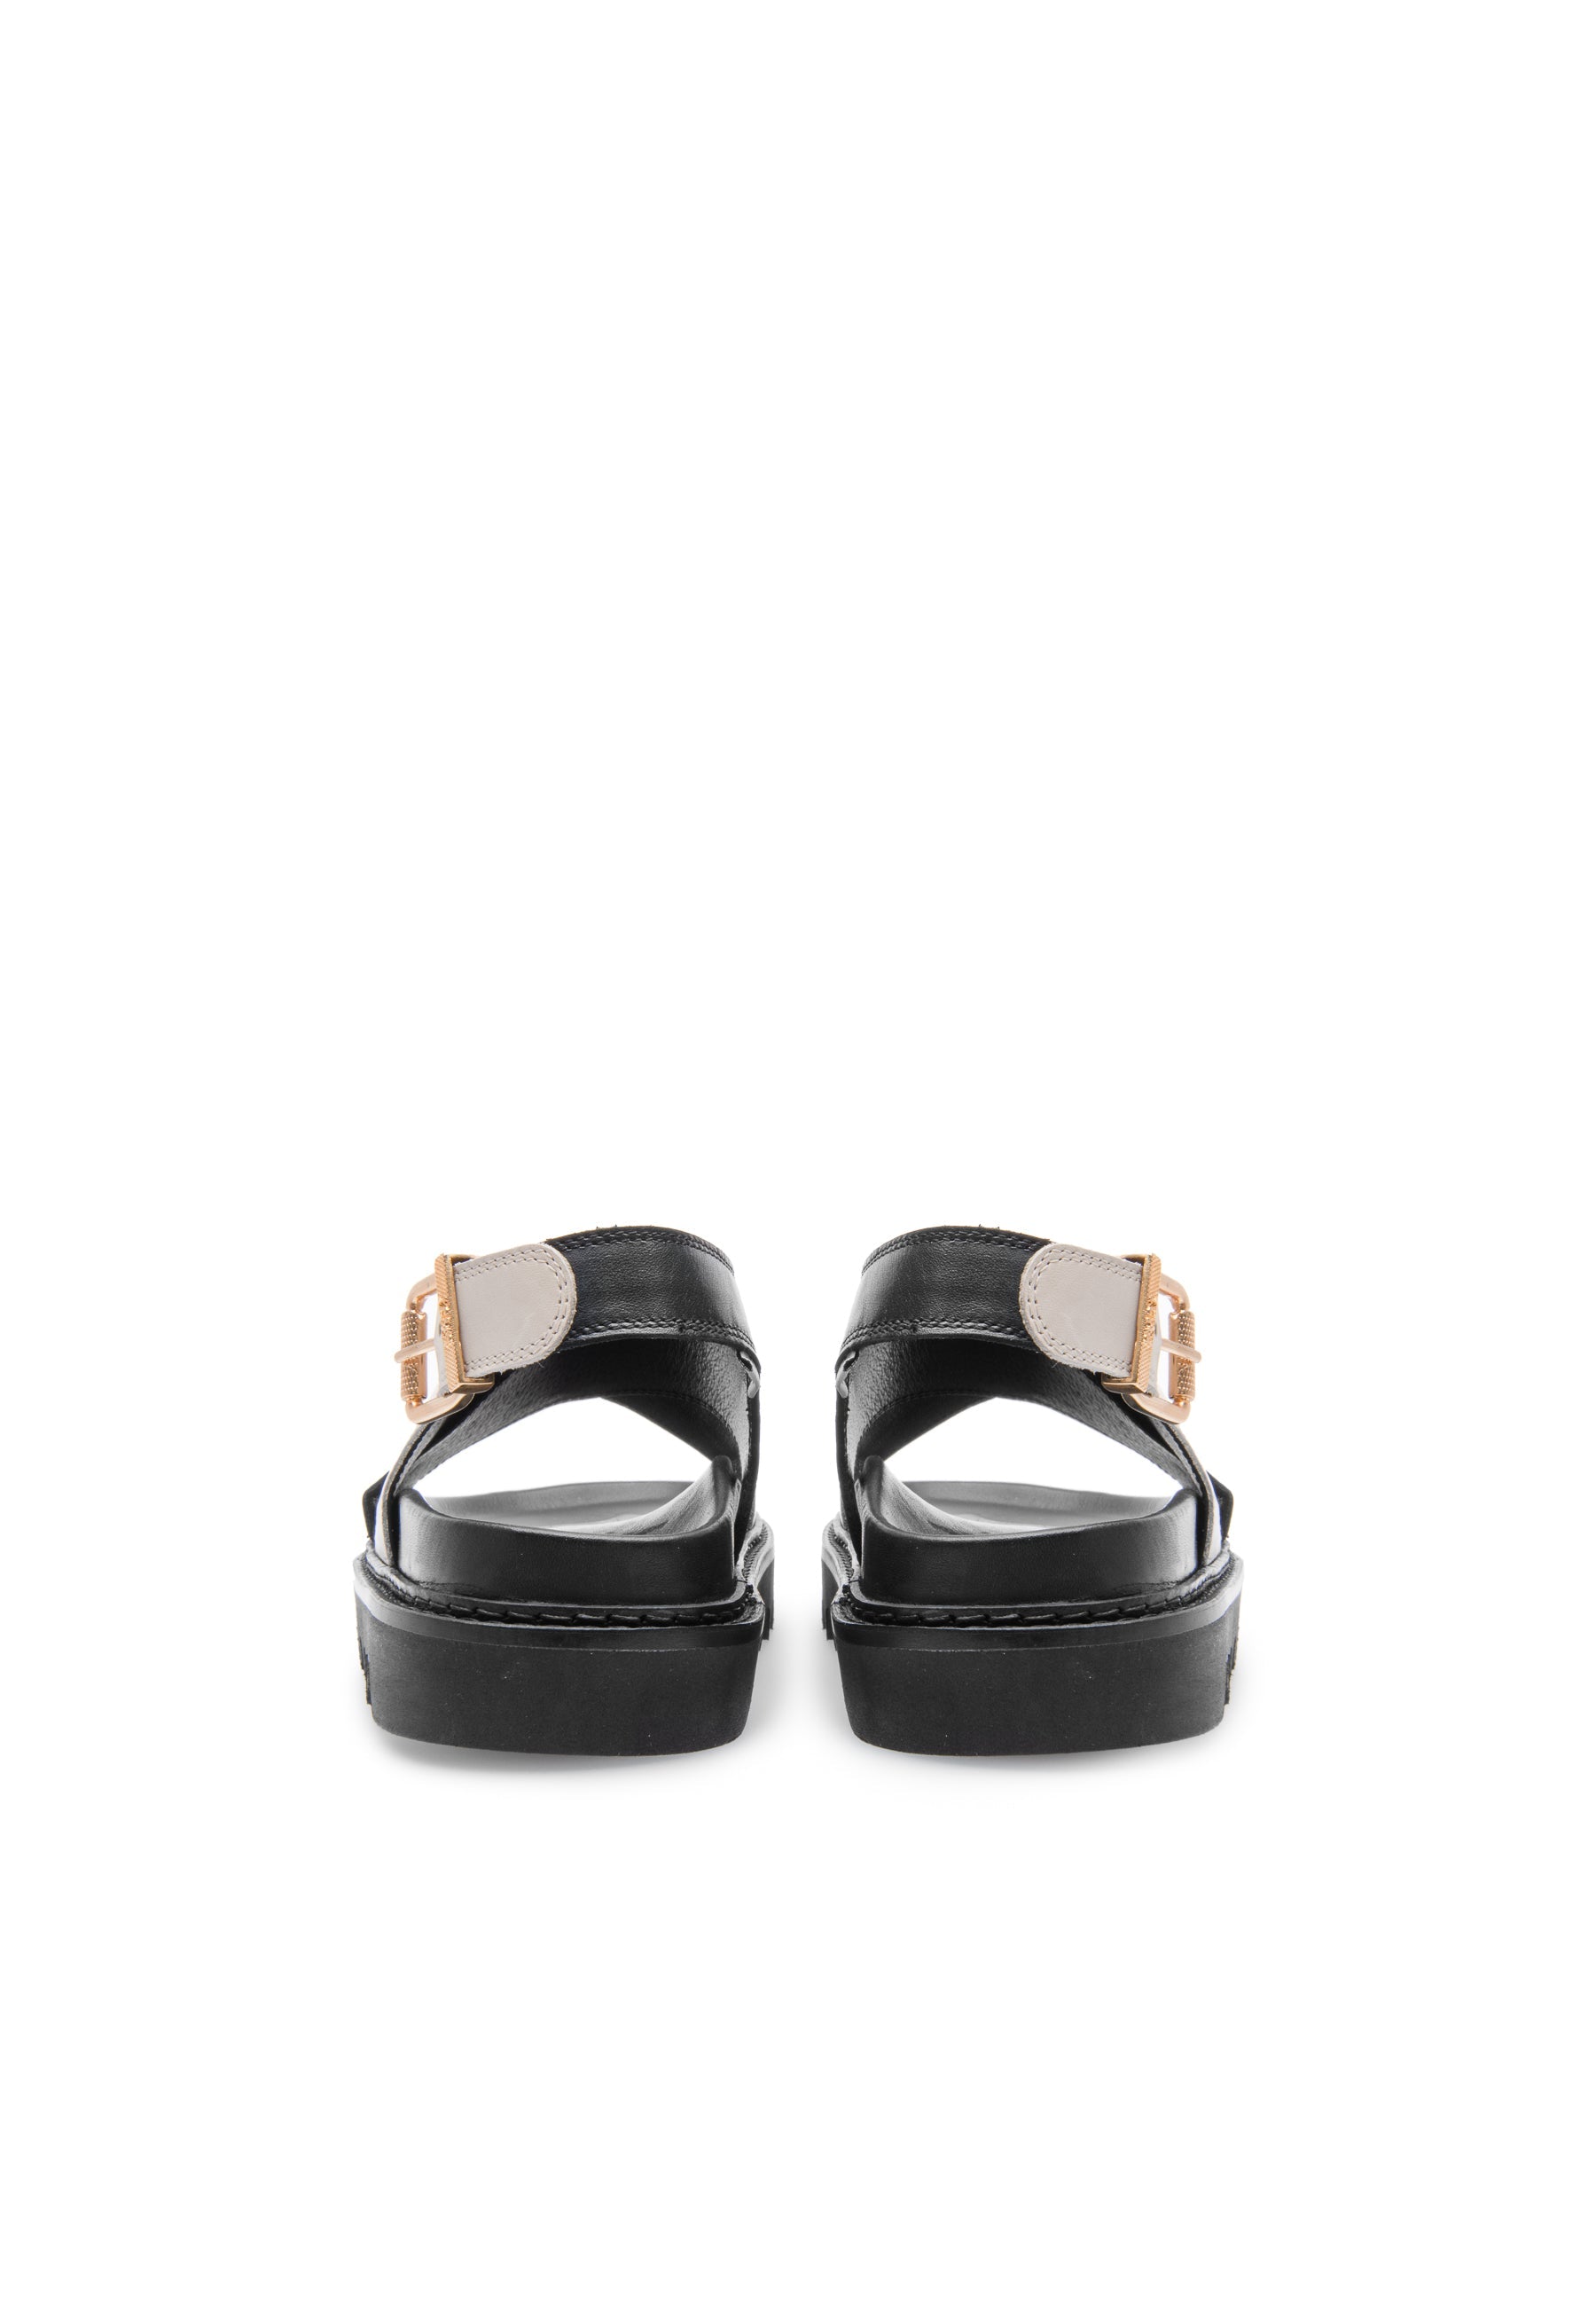 Diana Black Off White Leather Chunky Sandals LAST1522 - 5